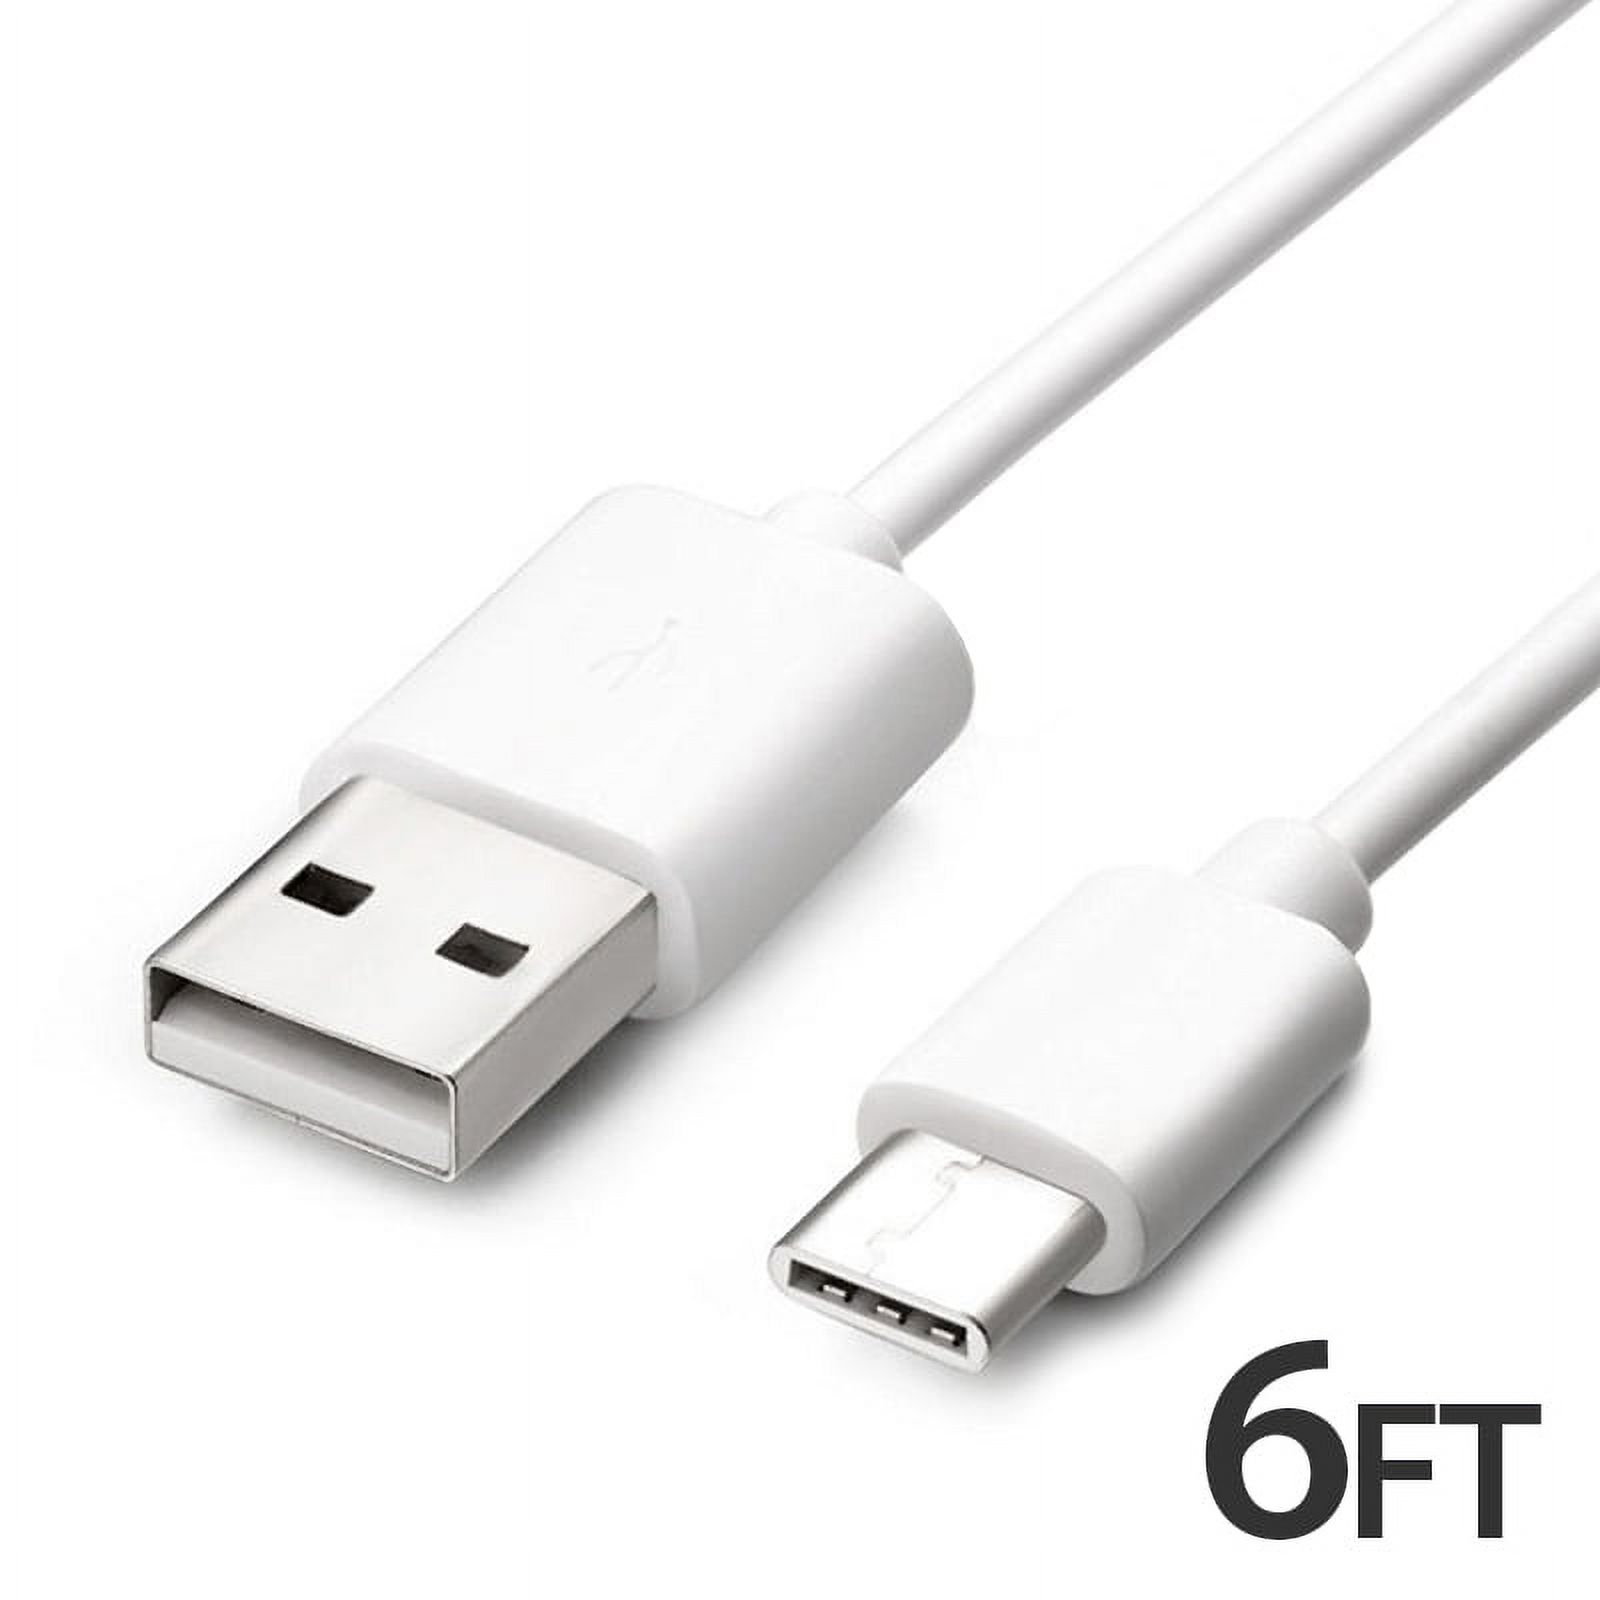 2x 6FT USB Type C Cable Fast Charging Cable USB-C Type-C 3.1 Data Sync Charger Cable Cord For Samsung Galaxy S9 S9+ Galaxy S8 S8 Plus Nexus 5X 6P OnePlus 2 3 LG G5 G6 V20 HTC M10 Google Pixel XL - image 3 of 7